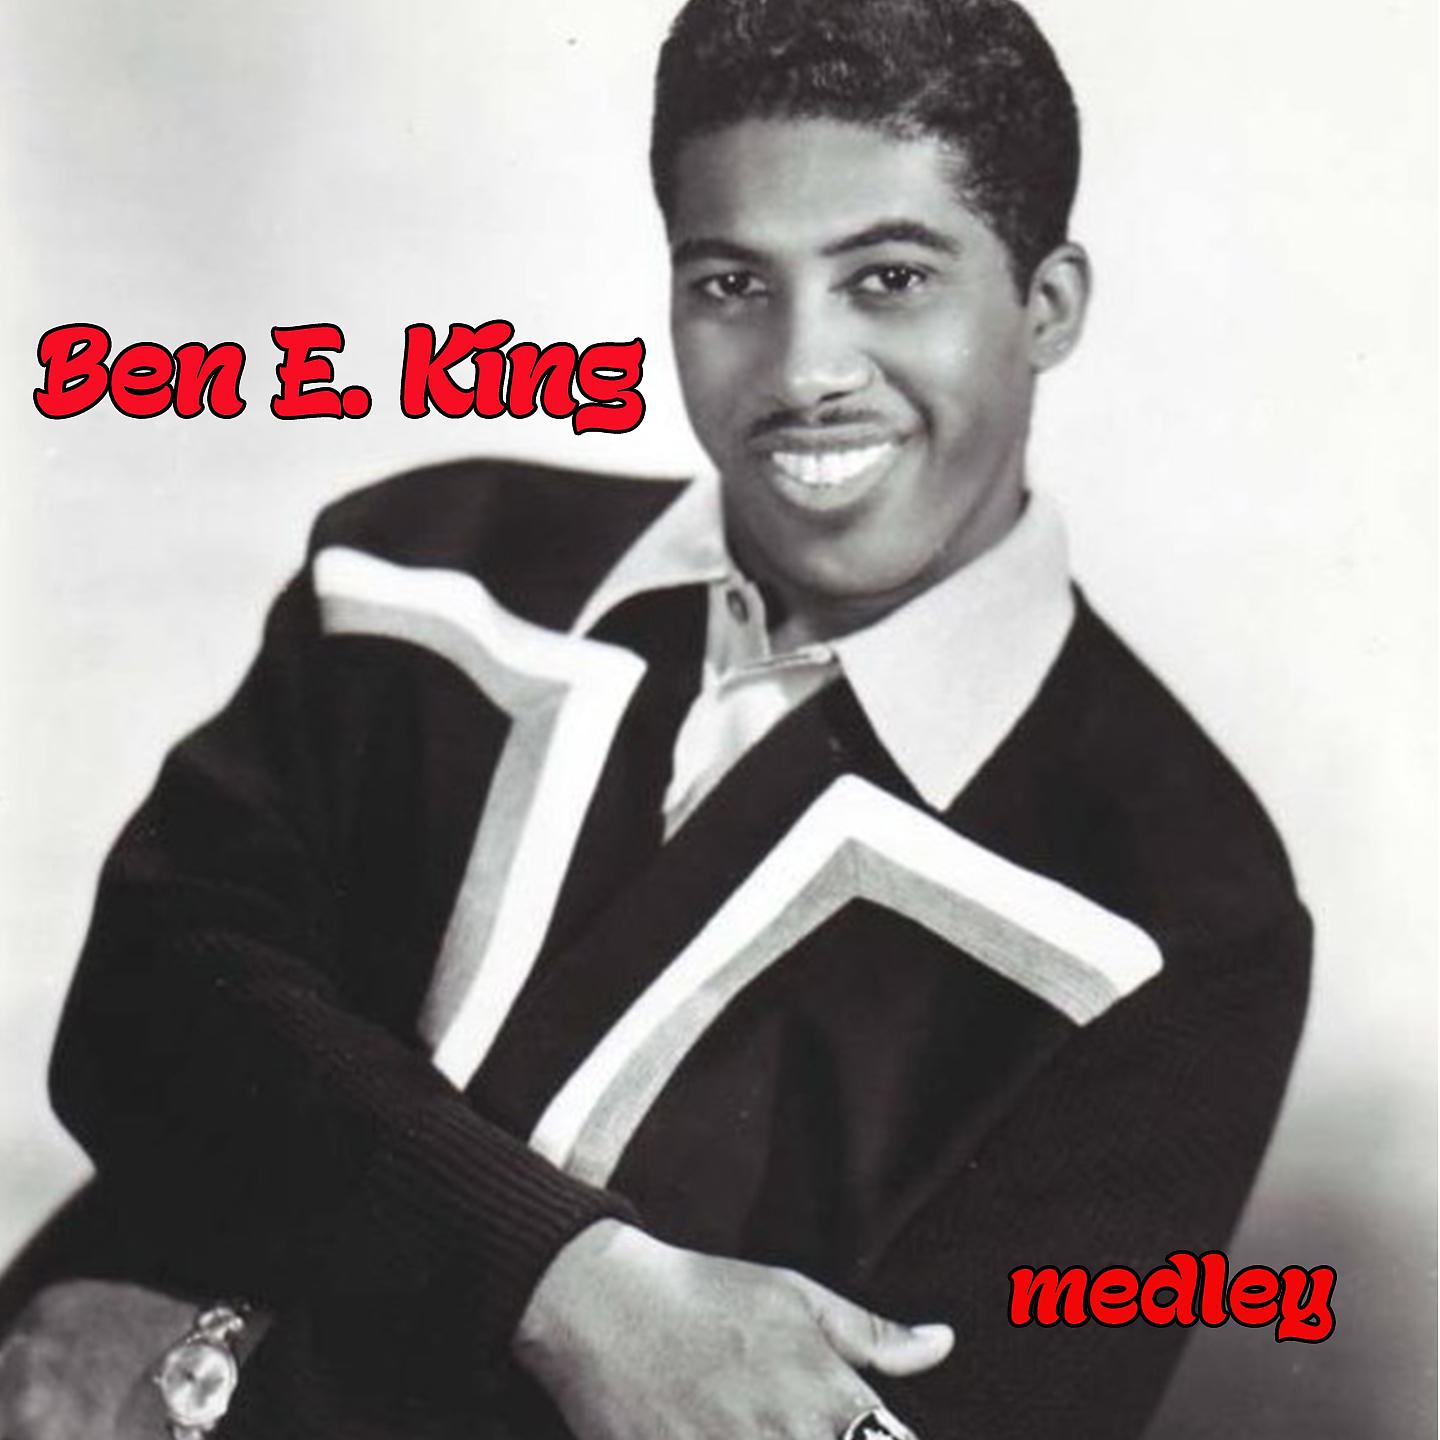 Постер альбома Ben E. King Medley: Stand by Me / Spanish Harlem / At Last / Sway / Fever / Quizas, Quizas, Quizas / What a Diff'rence a Day Made / Besame Mucho / Moon River / Will You Still Love Me Tomorrow / Show Me the Way / Perfidia / Don't Play That Song (You Lied)